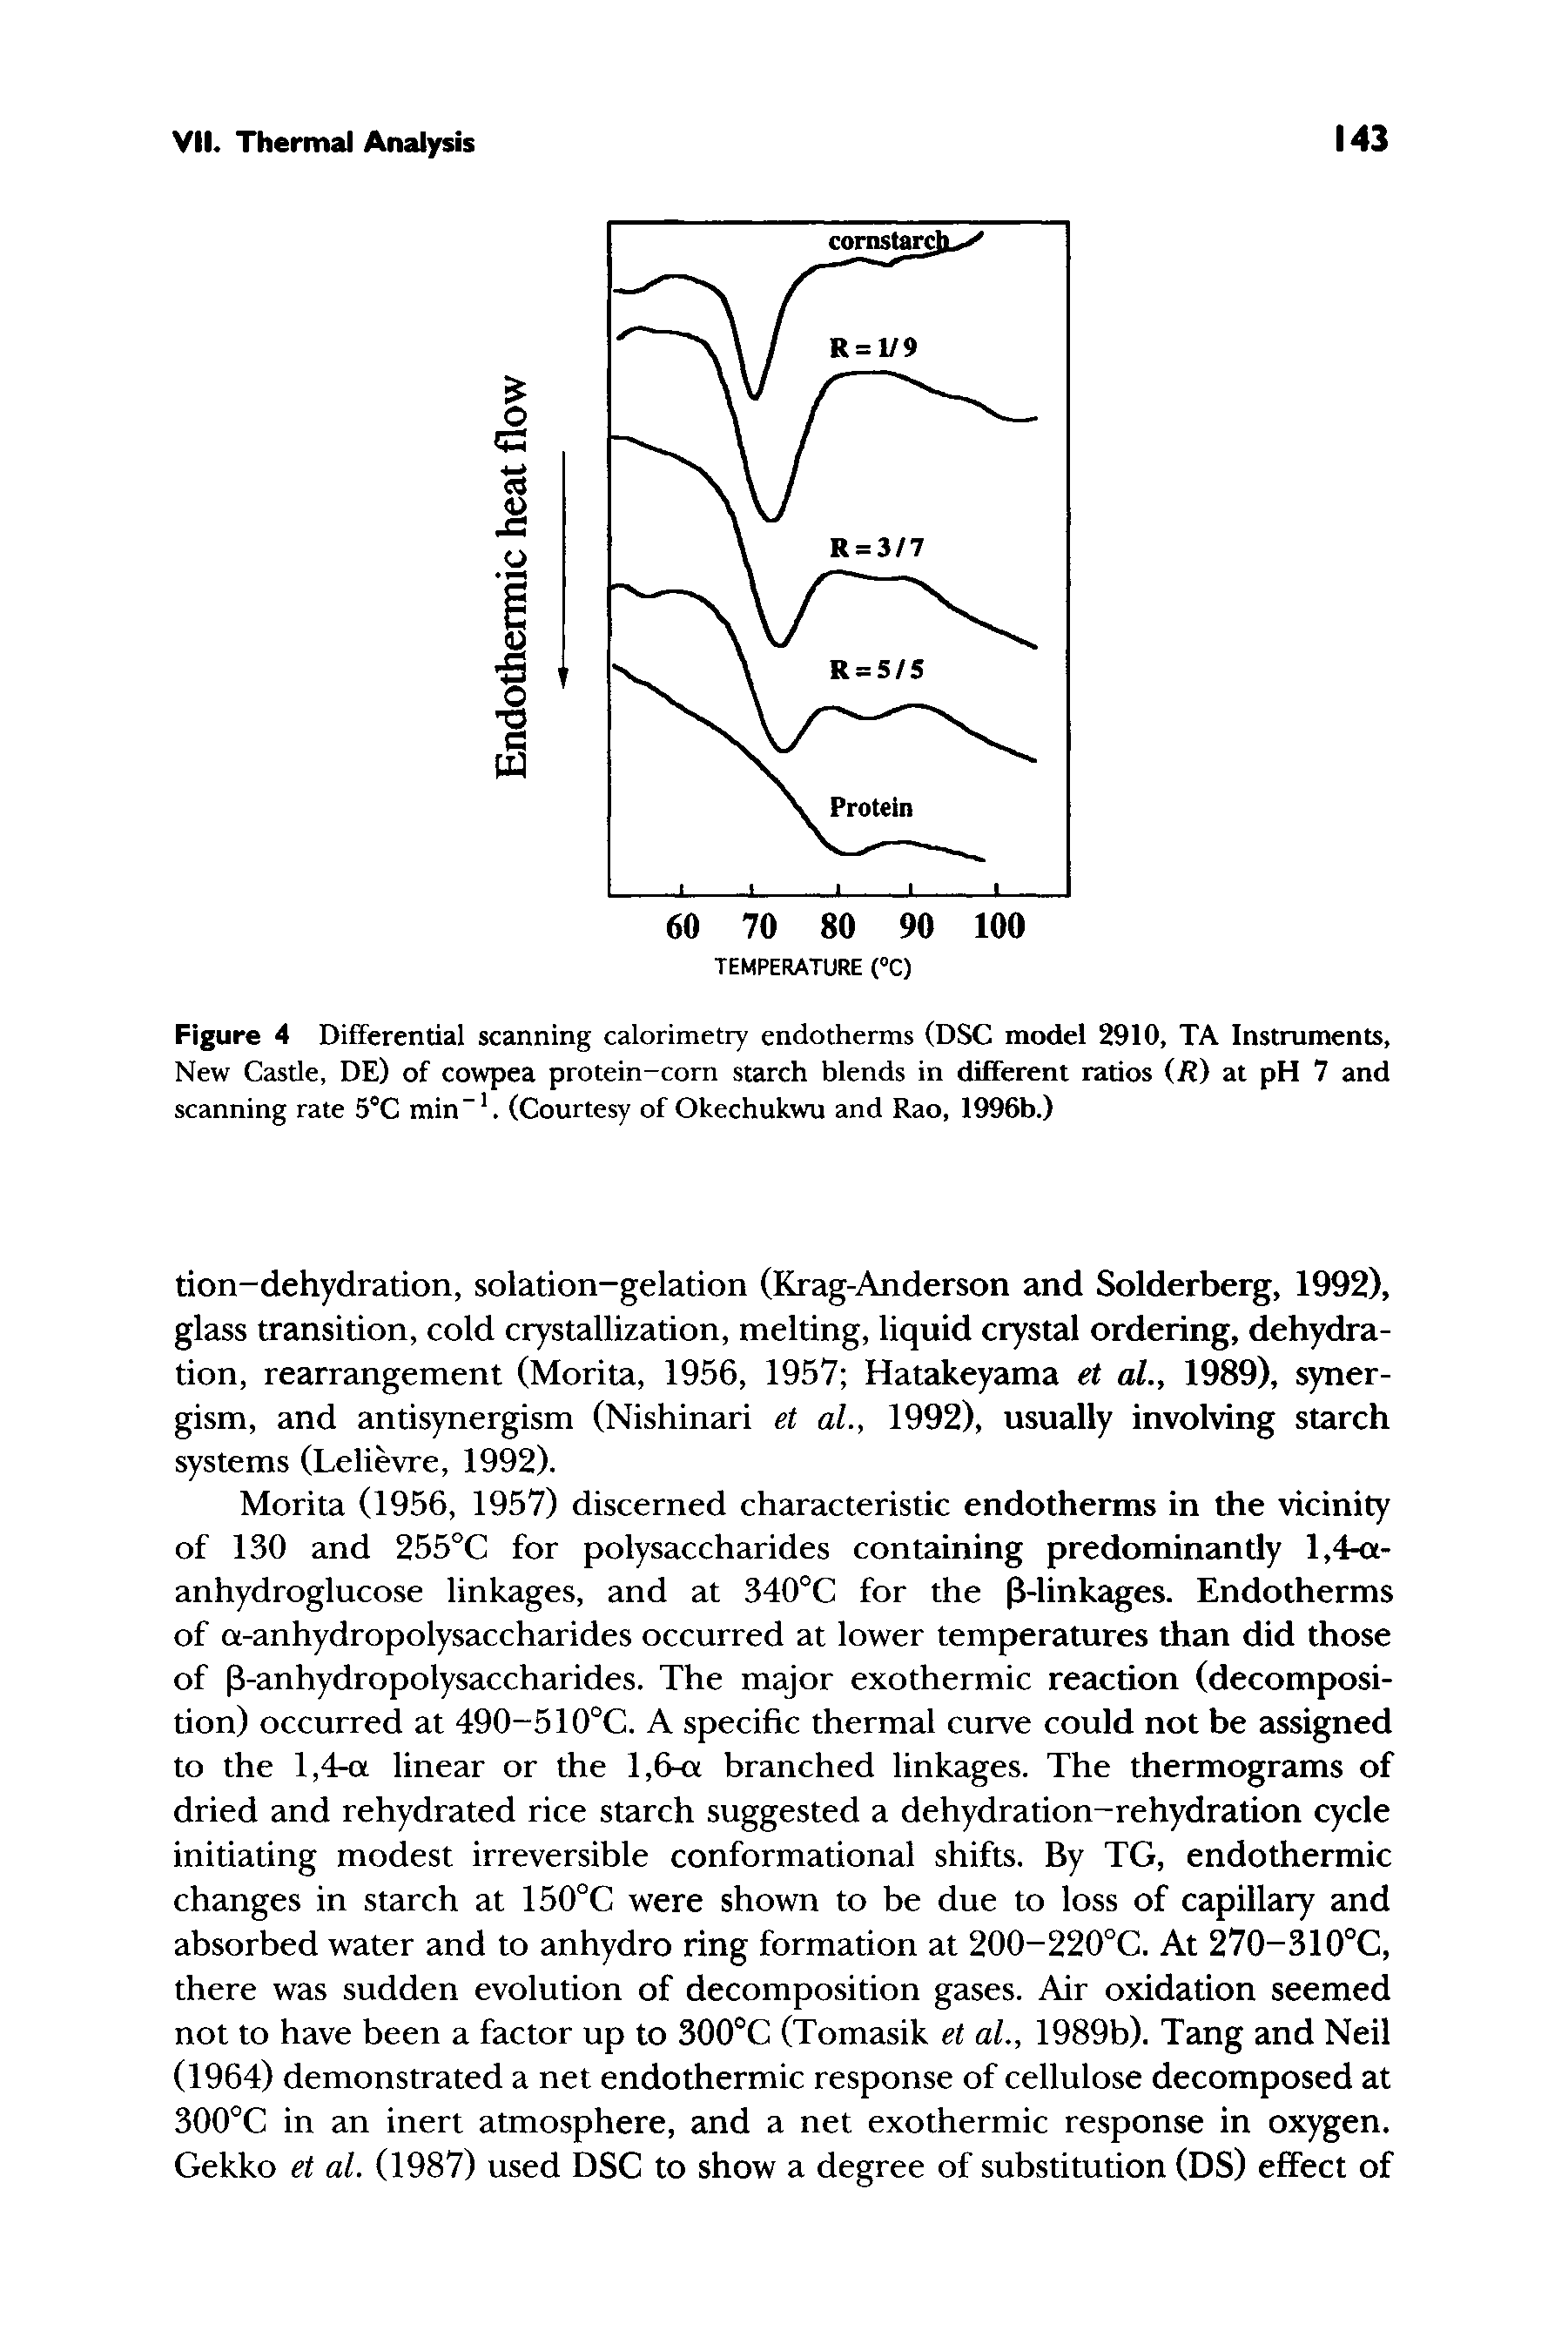 Figure 4 Differential scanning calorimetry endotherms (DSC model 2910, TA Instruments, New Castle, DE) of cowpea protein-corn starch blends in different ratios (R) at pH 7 and scanning rate 5°C min-1. (Courtesy of Okechukwu and Rao, 1996b.)...